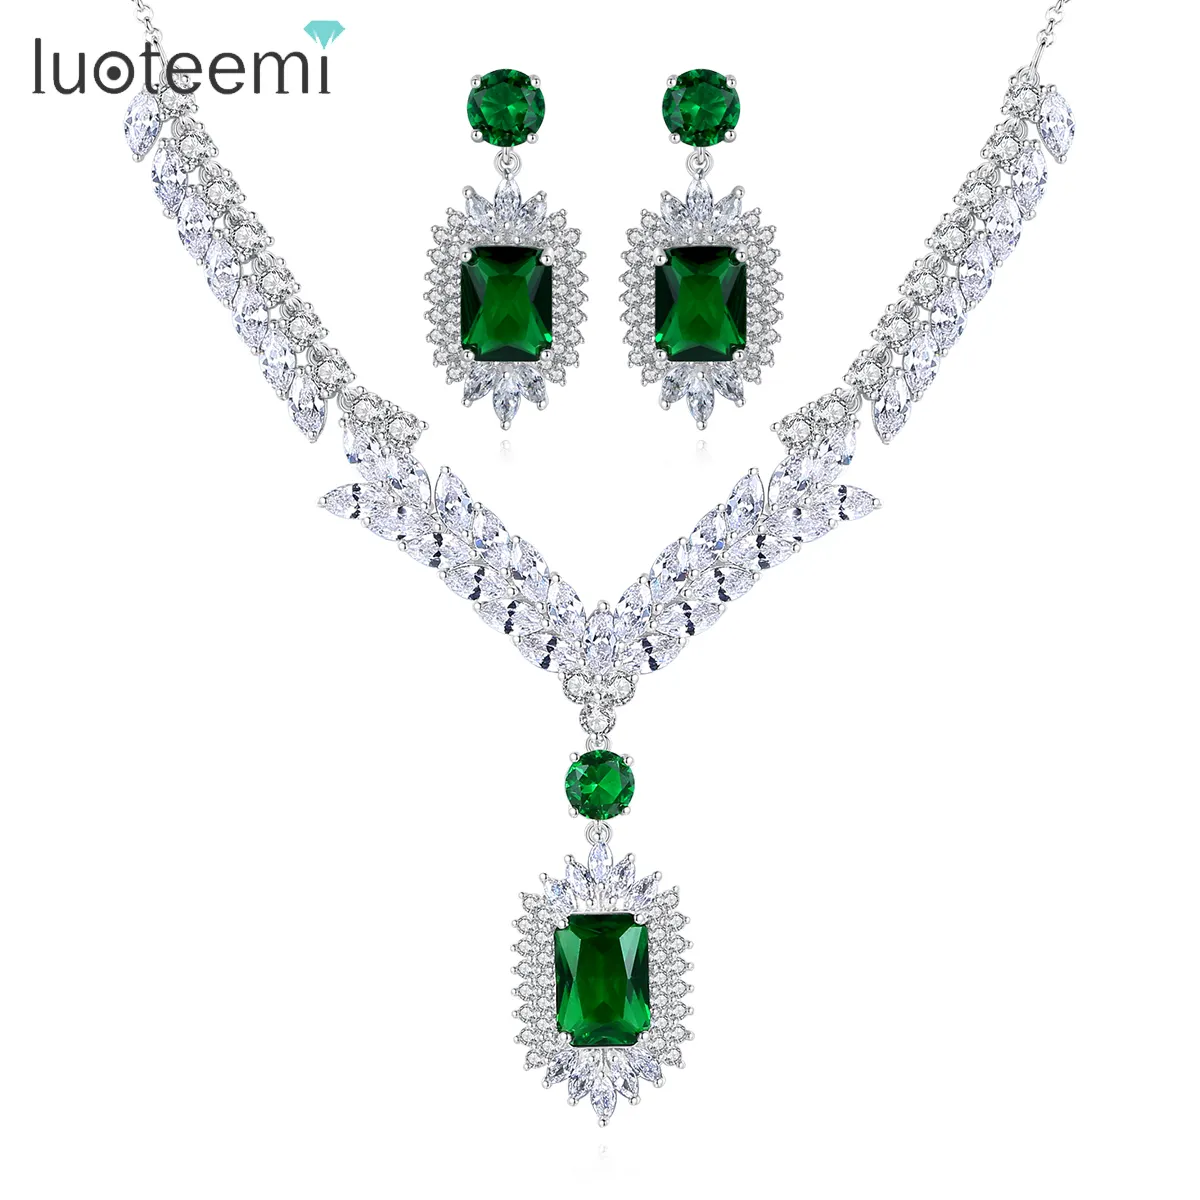 LUOTEEMI Bán Hot Phụ Nữ Sang Trọng Emerald Jewelry Set Cubic Zirconia Necklace Earrings Bộ Trang Sức